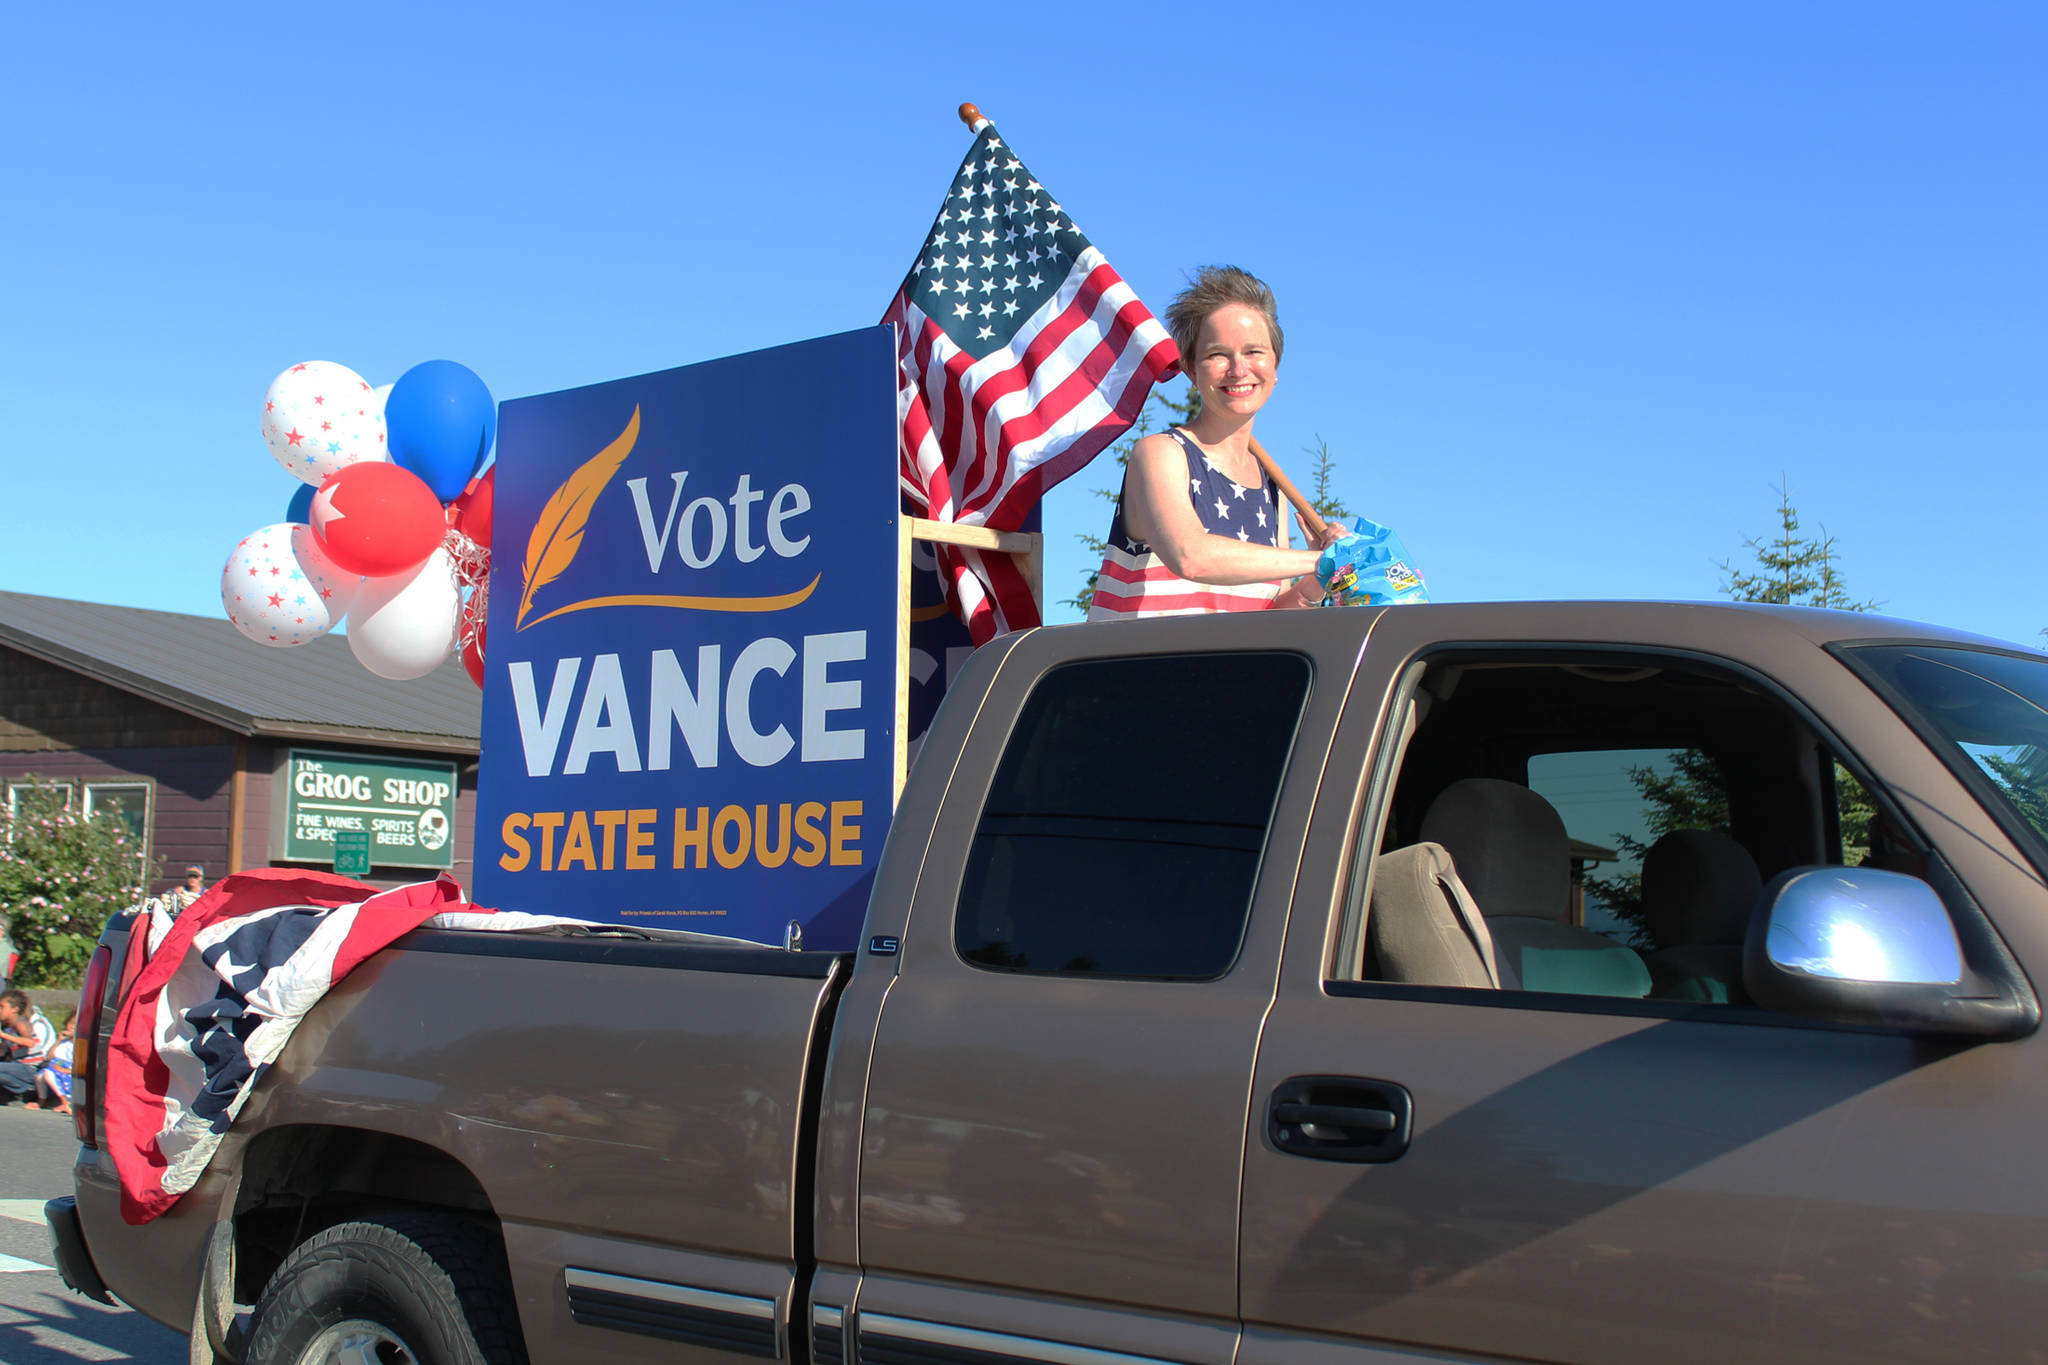 Sarah Vance, who is running for a seat in the Alaska House of Representatives, rides in the back of a truck during this year’s Independence Day parade Wednesday, July 4, 2018 in Homer, Alaska. Several political figures and candidates had floats in this year’s parade. (Photo by Megan Pacer/Homer News)